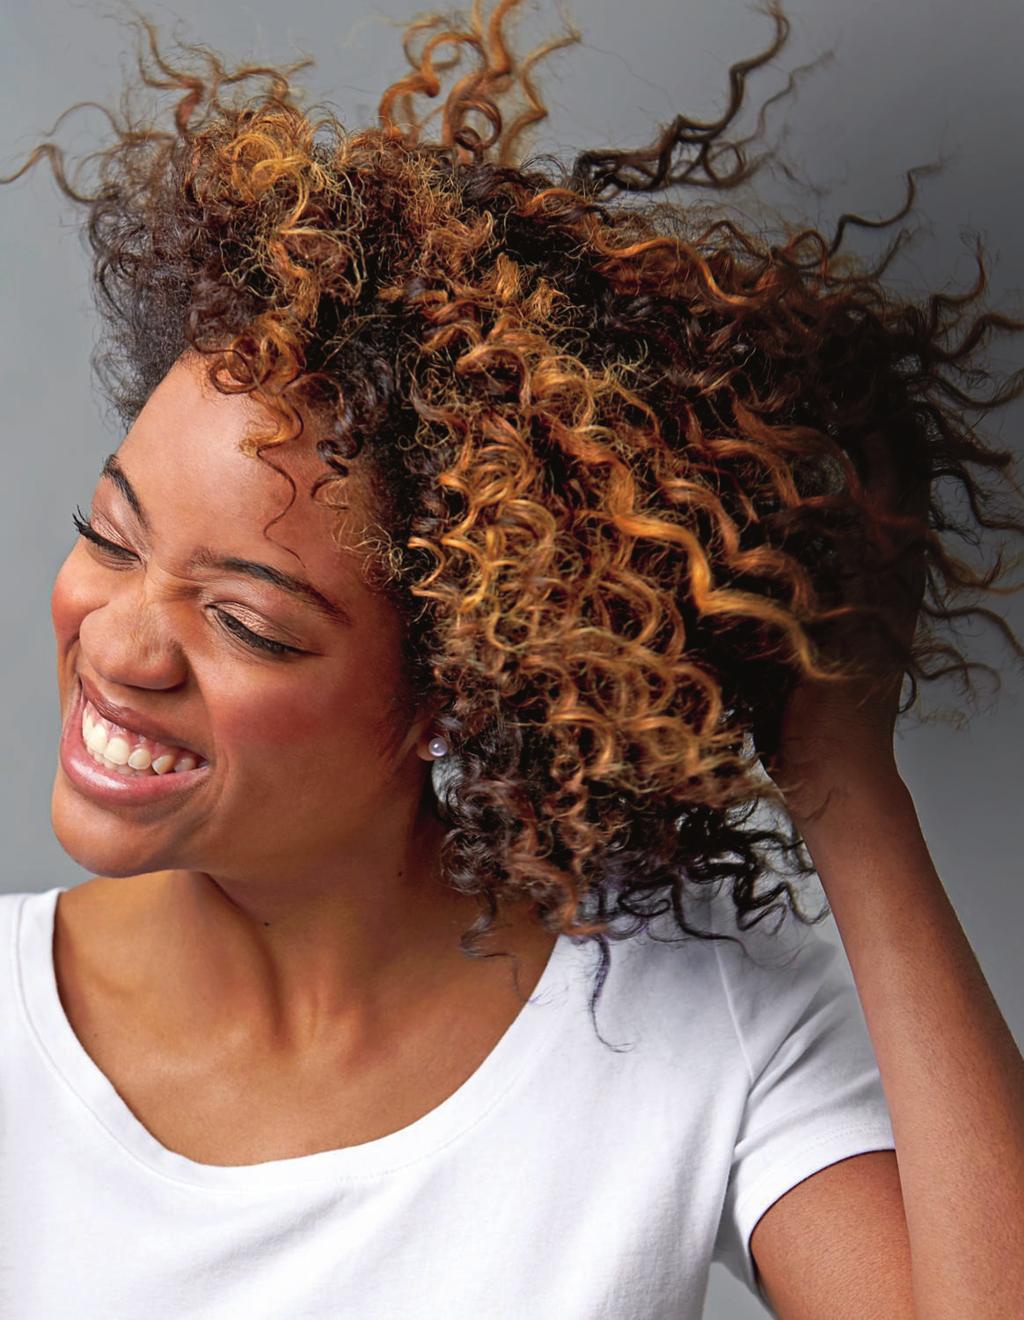 TRICK Frizz-free curls are really dependent on two things: hydration and hold. The first step is preserving the natural moisture your scalp produces by washing only every two to three days.